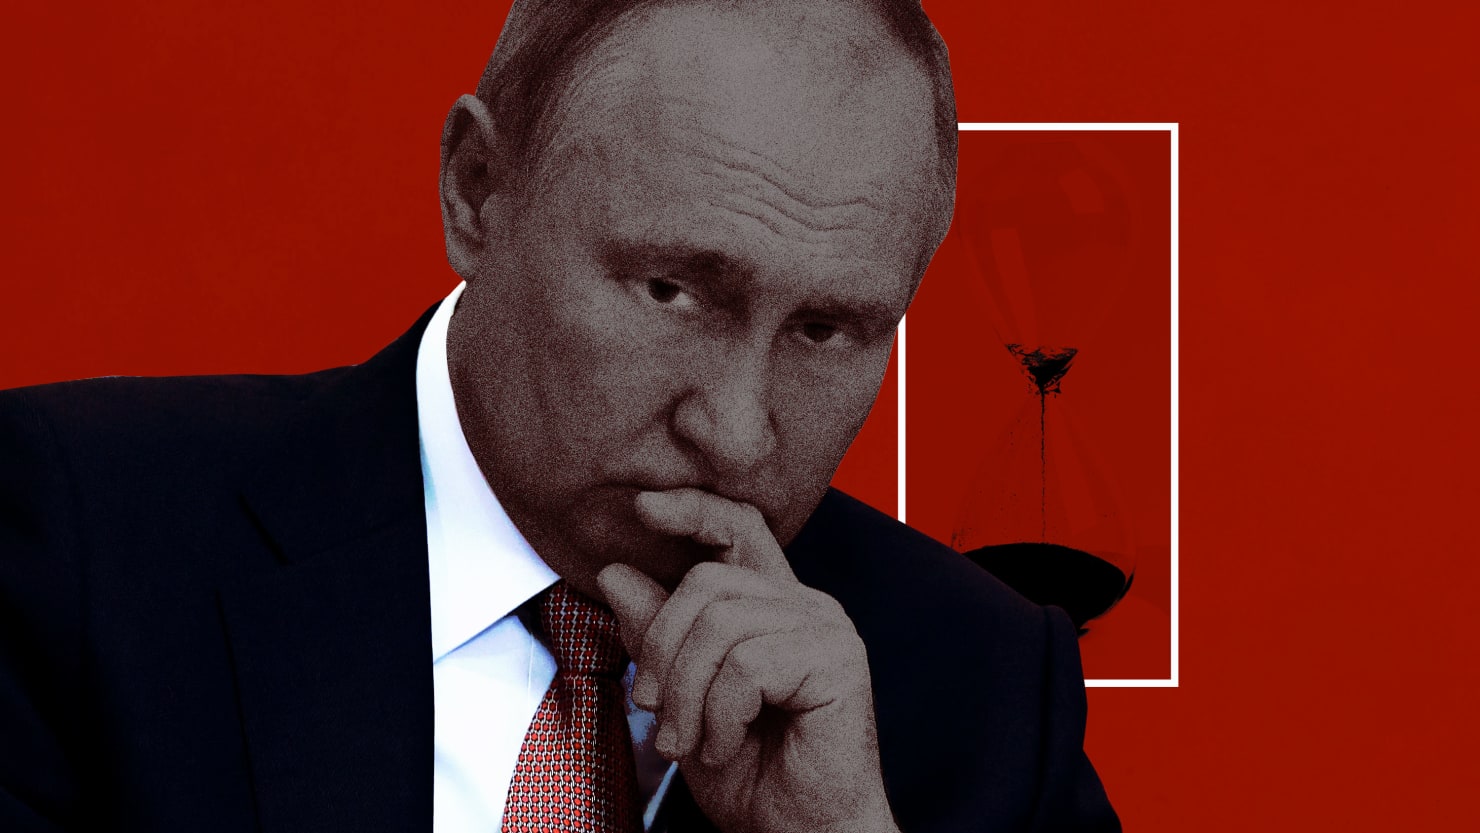 Russia Can Finally See that Putins Days Are Numbered